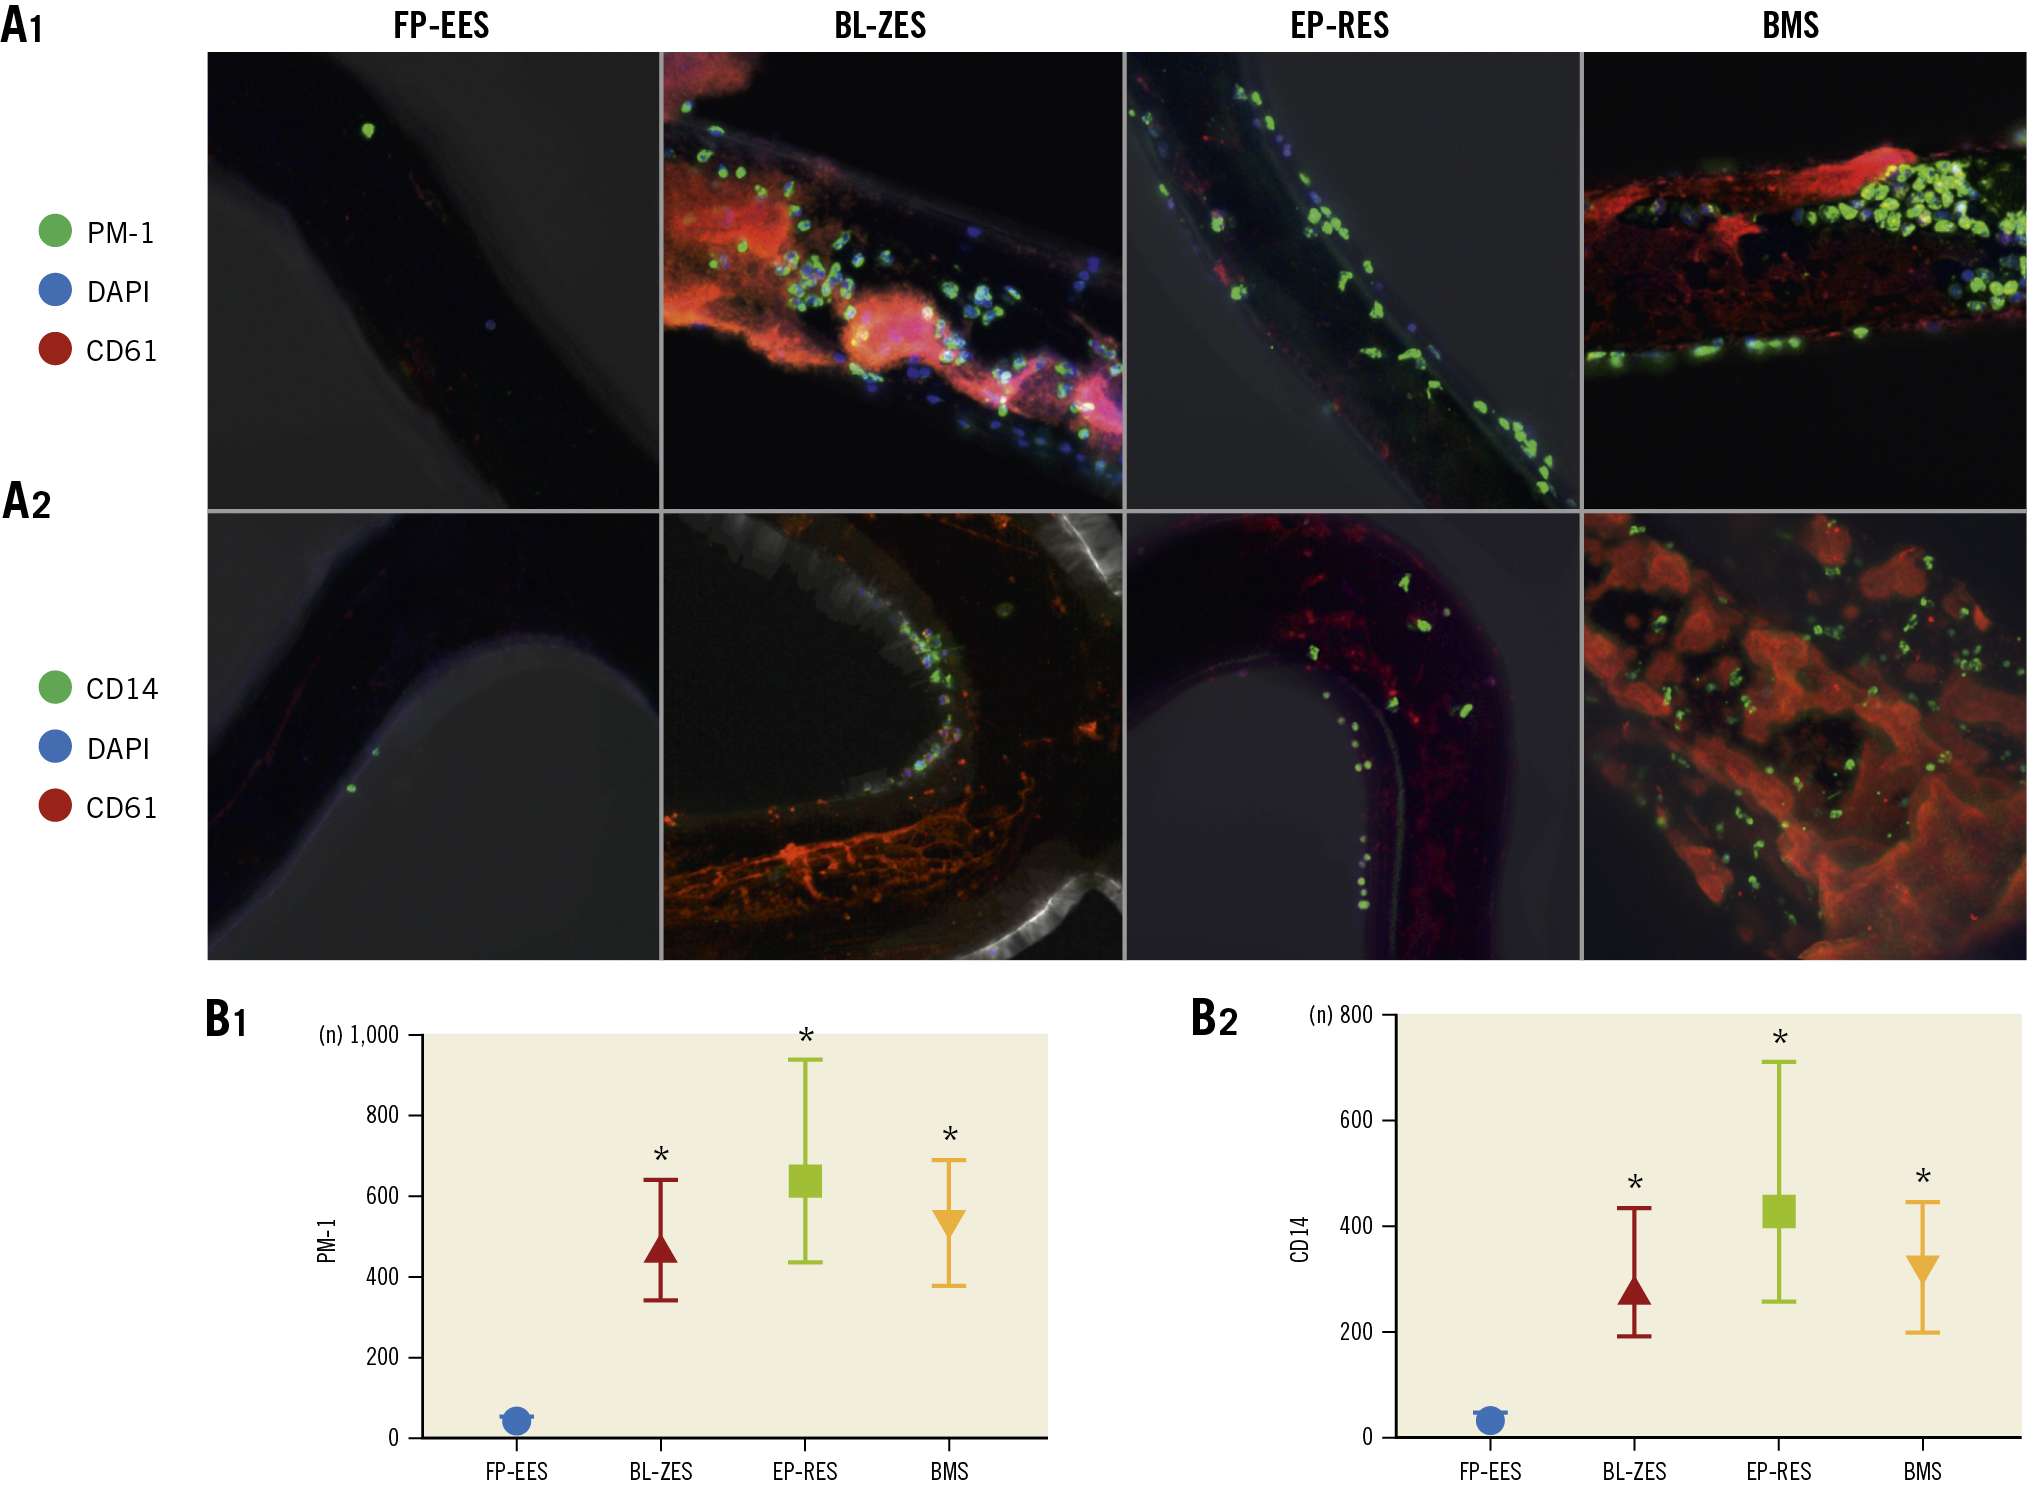 Figure 2. Representative confocal microscopic images using immunofluorescent staining against a neutrophil marker (PM-1) and a monocyte marker (CD14) in an ex vivo shunt model. A) The upper panels (A1 and A2) show confocal microscopic images with PM-1 staining and the lower panels show confocal microscopic images with CD-14 staining. FP-EES showed minimal neutrophil and monocyte attachment. However, BL-ZES, EP-RES and BMS showed many neutrophils and monocytes on the stent surfaces. B) Graphs show the number of PM-1 (B1) and CD-14 (B2) positive cells on the stent struts. The number of PM-1 and CD-14 was significantly the least in FP-EES relative to BL-ZES, EP-RES and BMS. Data are presented as mean±standard deviation for each group. * p<0.05 vs FP-EES.